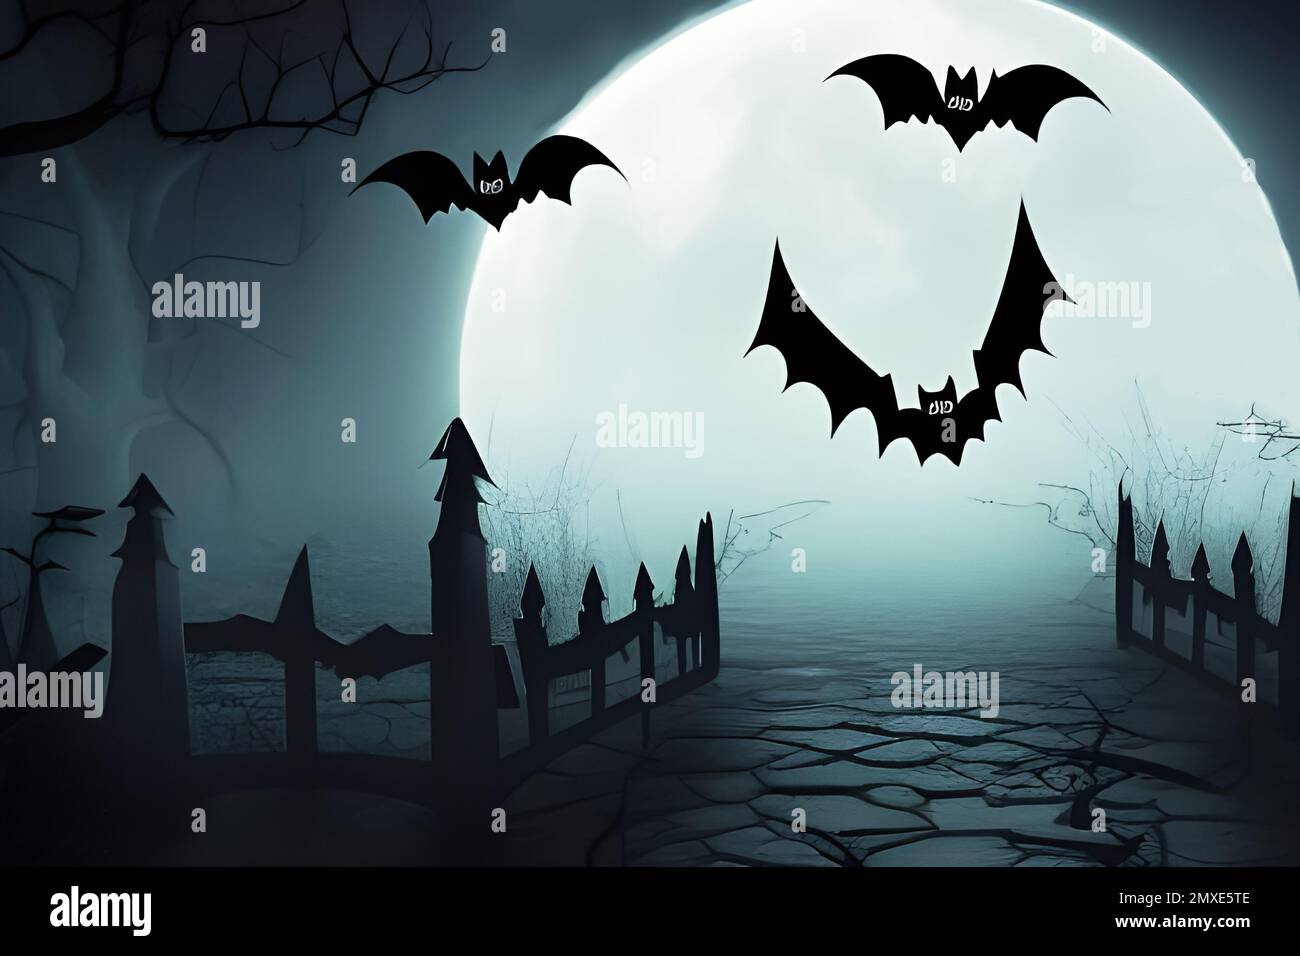 Halloween theme with bats and full moon. Stock Photo